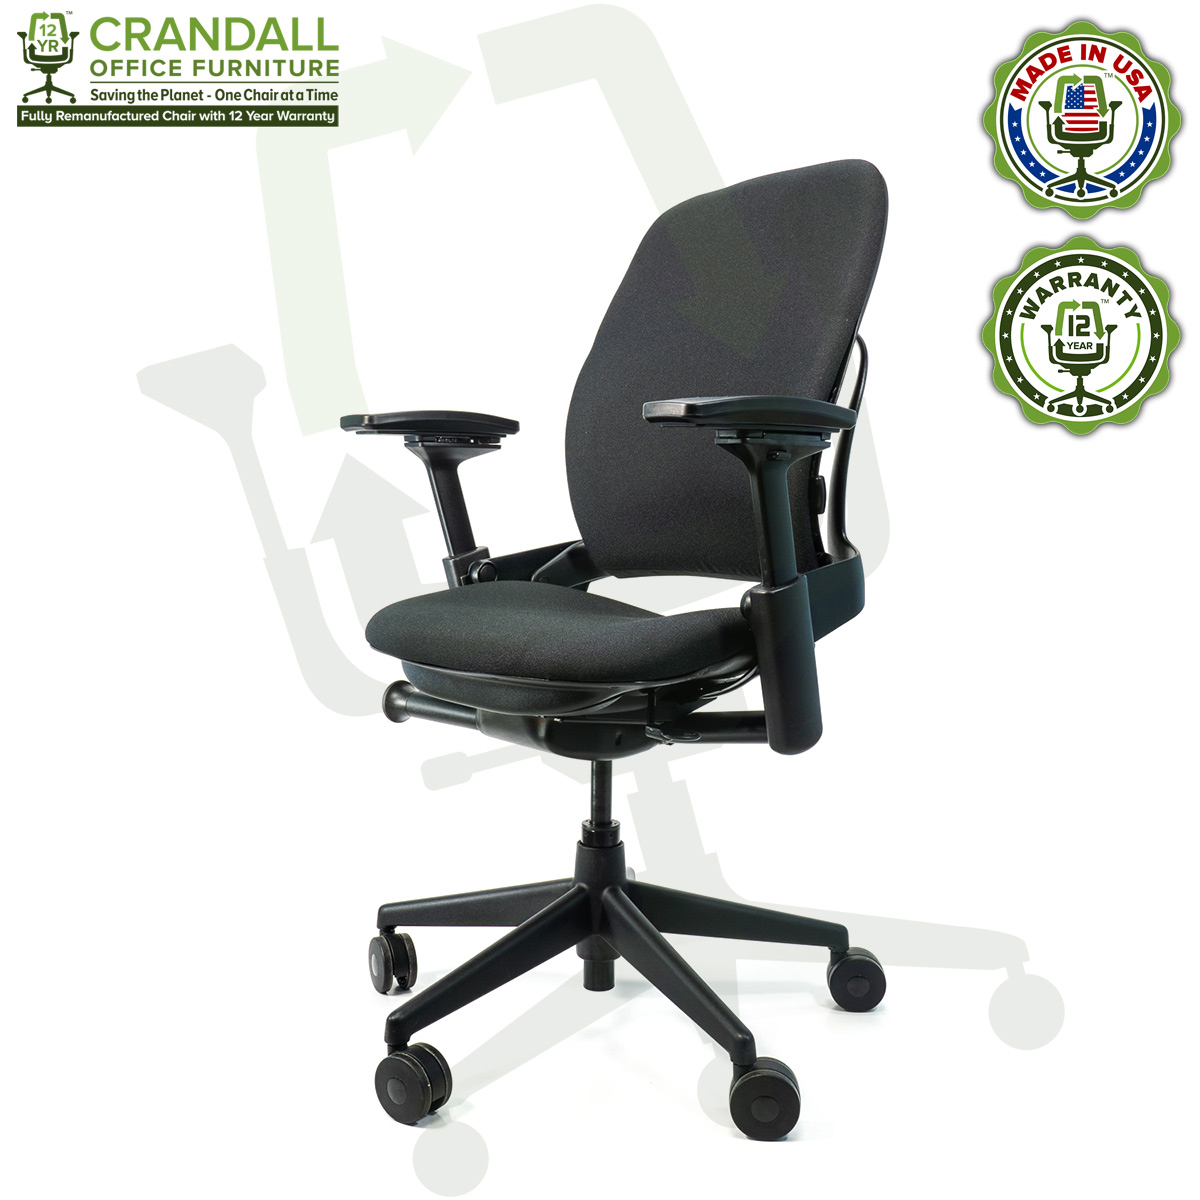 Crandall-Office-Remanufactured-Steelcase-462-V2-Leap-Chair-02